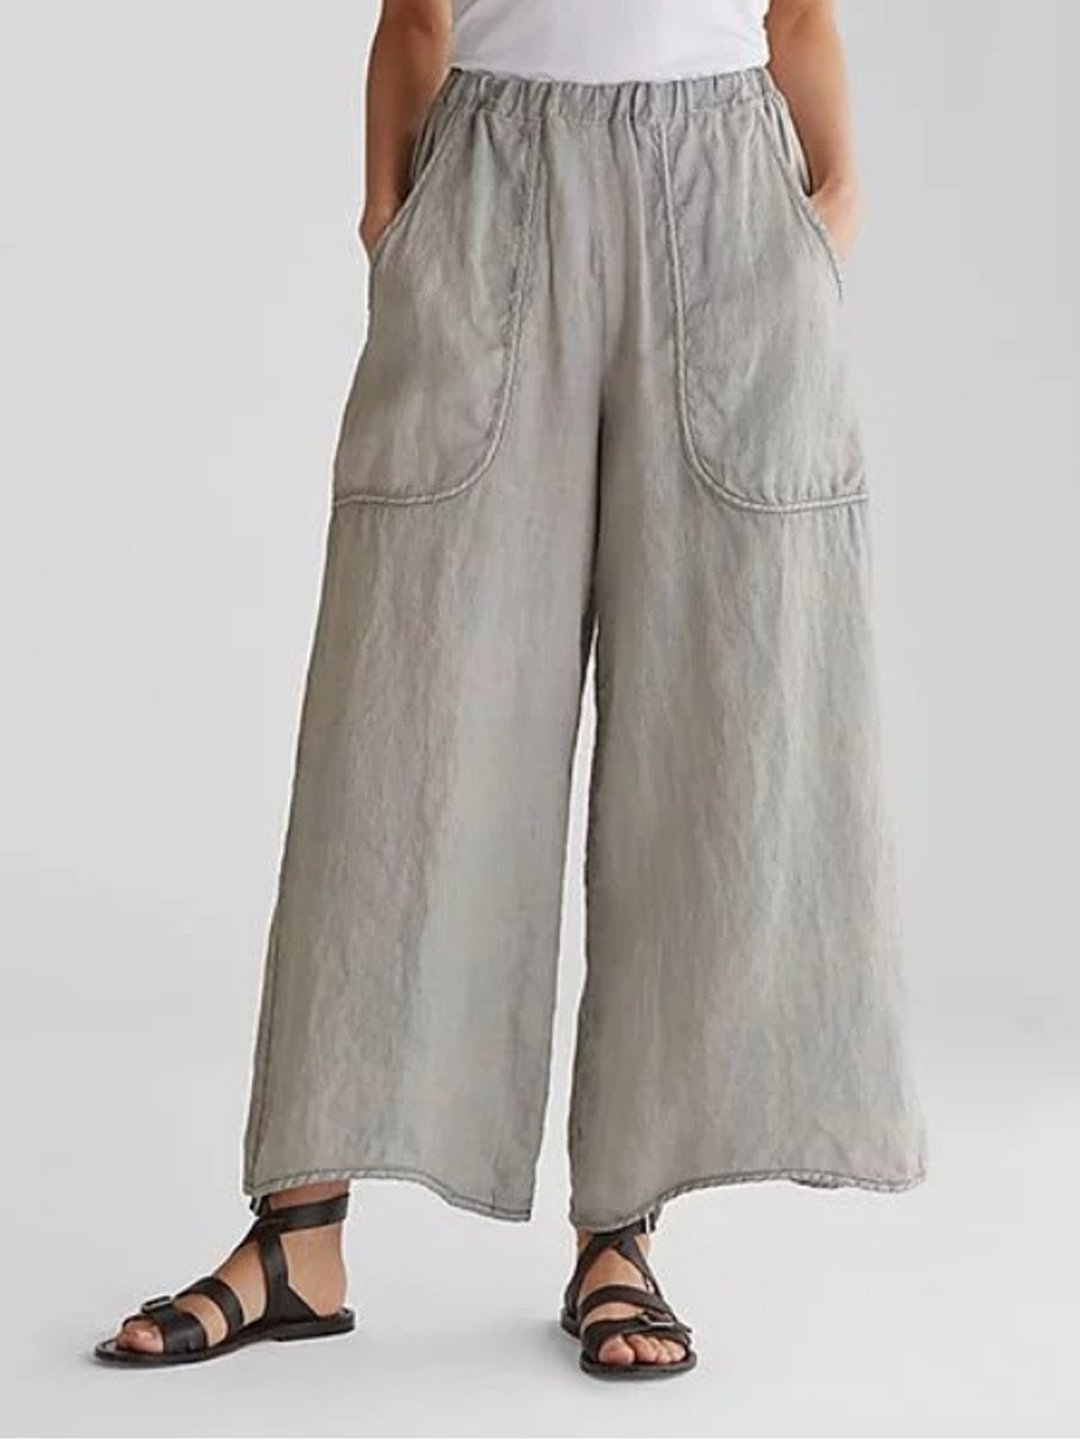 Pocketed Cotton Linen Pants Wide-Legged Mid-Waist Casual Pants